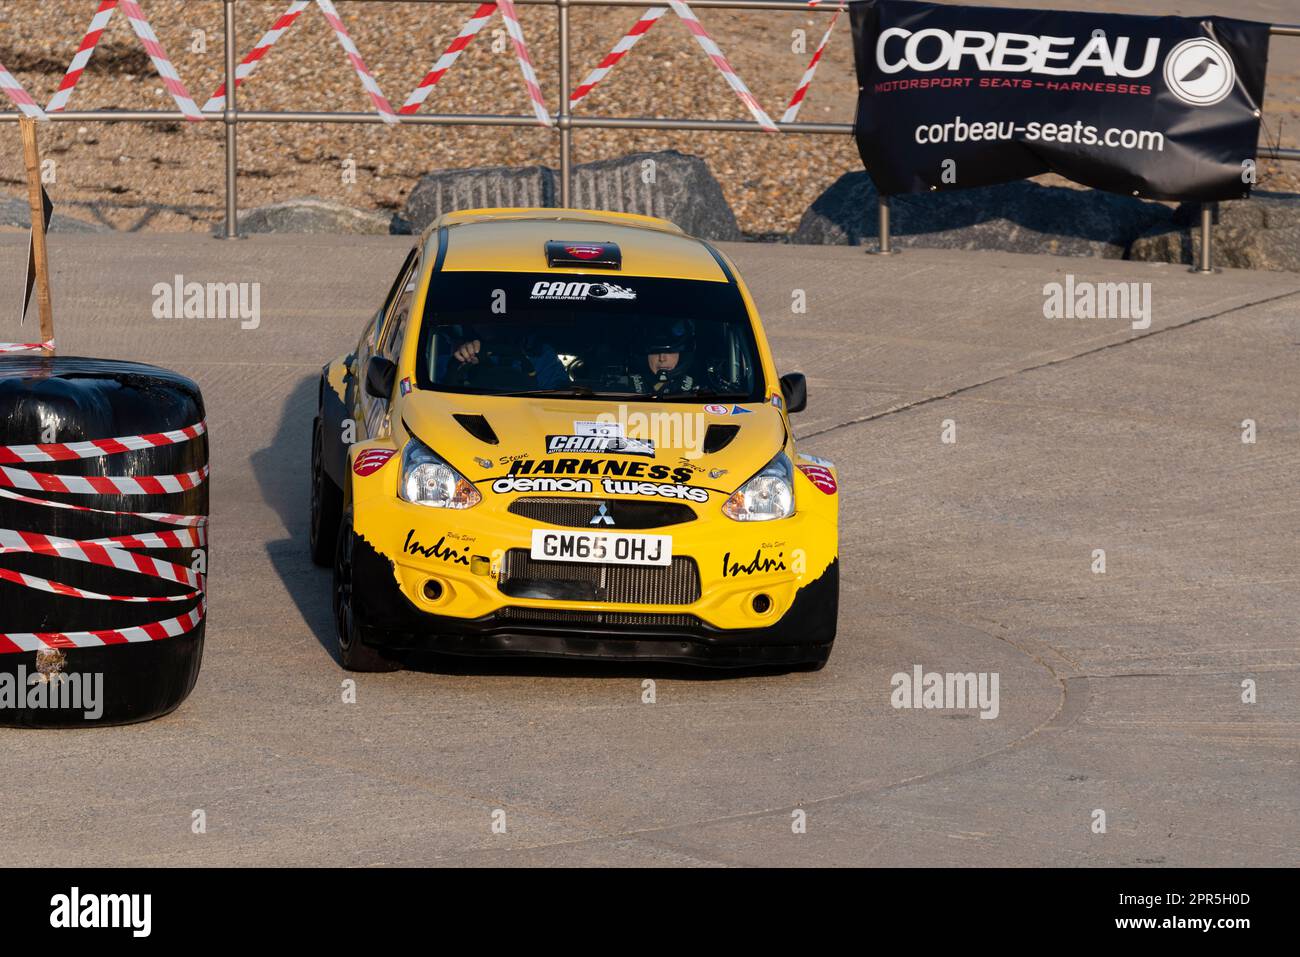 John Indri driving a Mitsubishi Mirage R5+ competing in Corbeau Seats rally on the seafront at Clacton on Sea, Essex, UK. Co driver Claire Williams Stock Photo